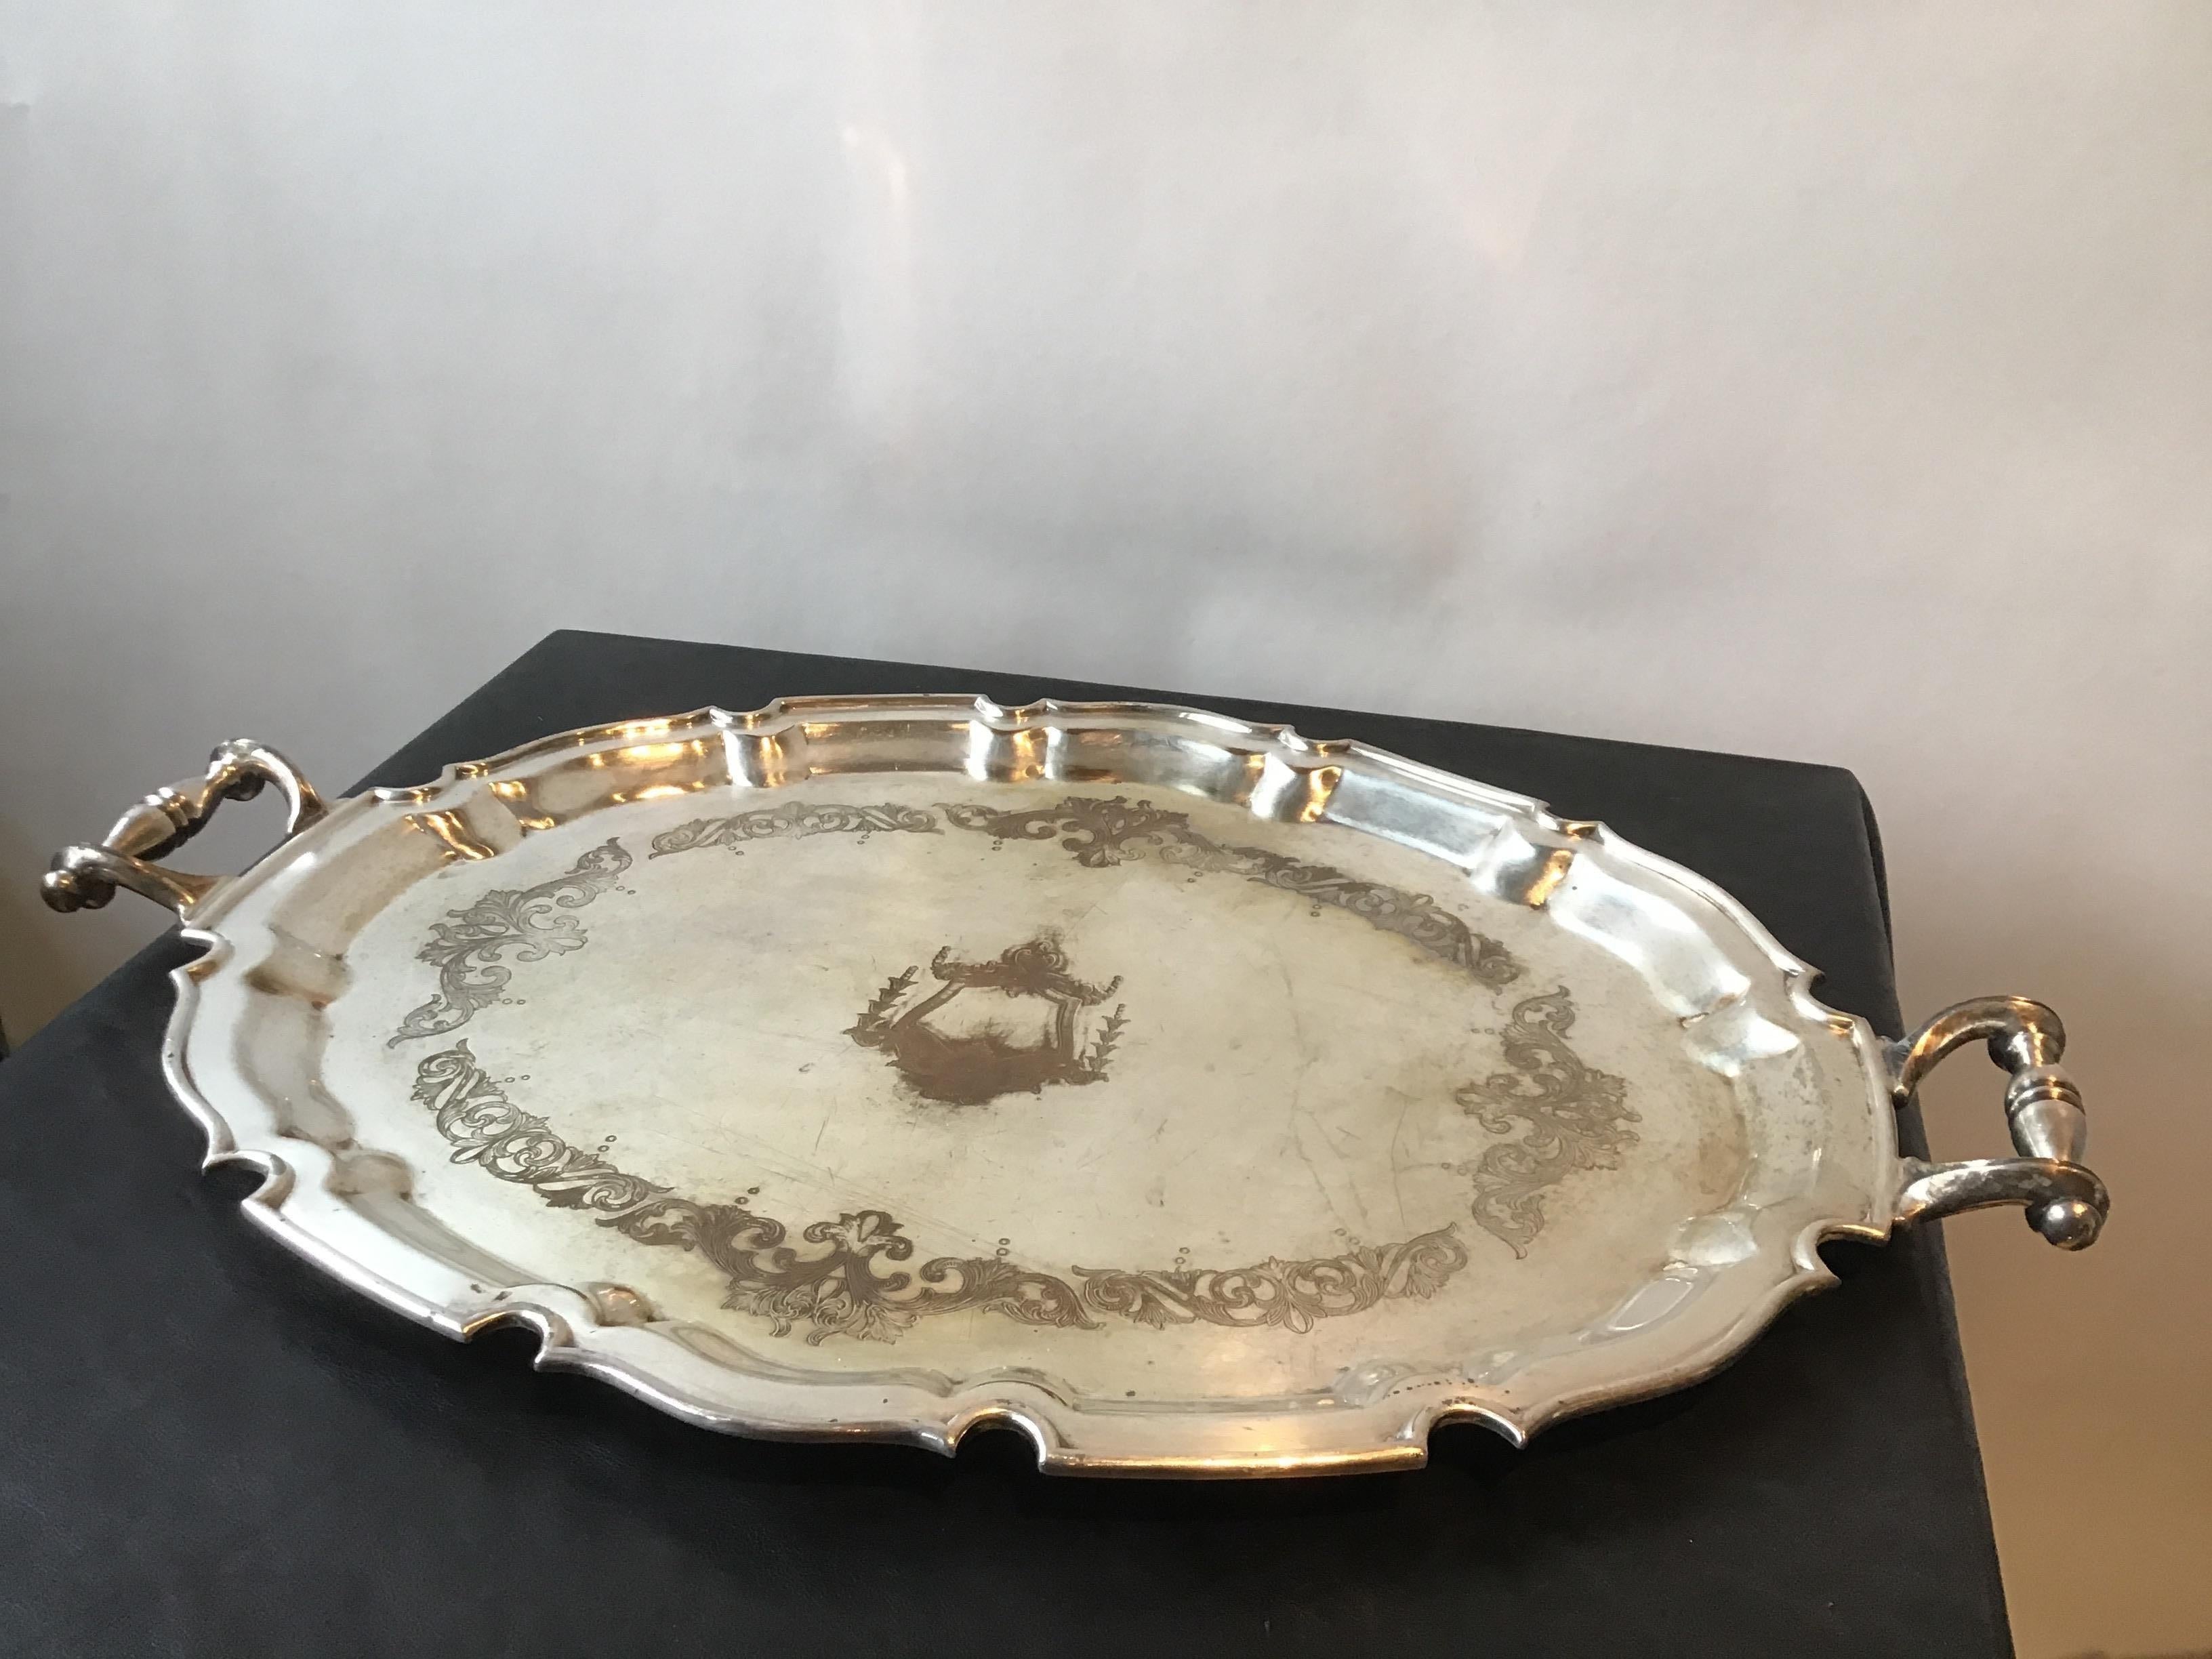 1862 silver plate serving tray. Silver plate worn away in areas.